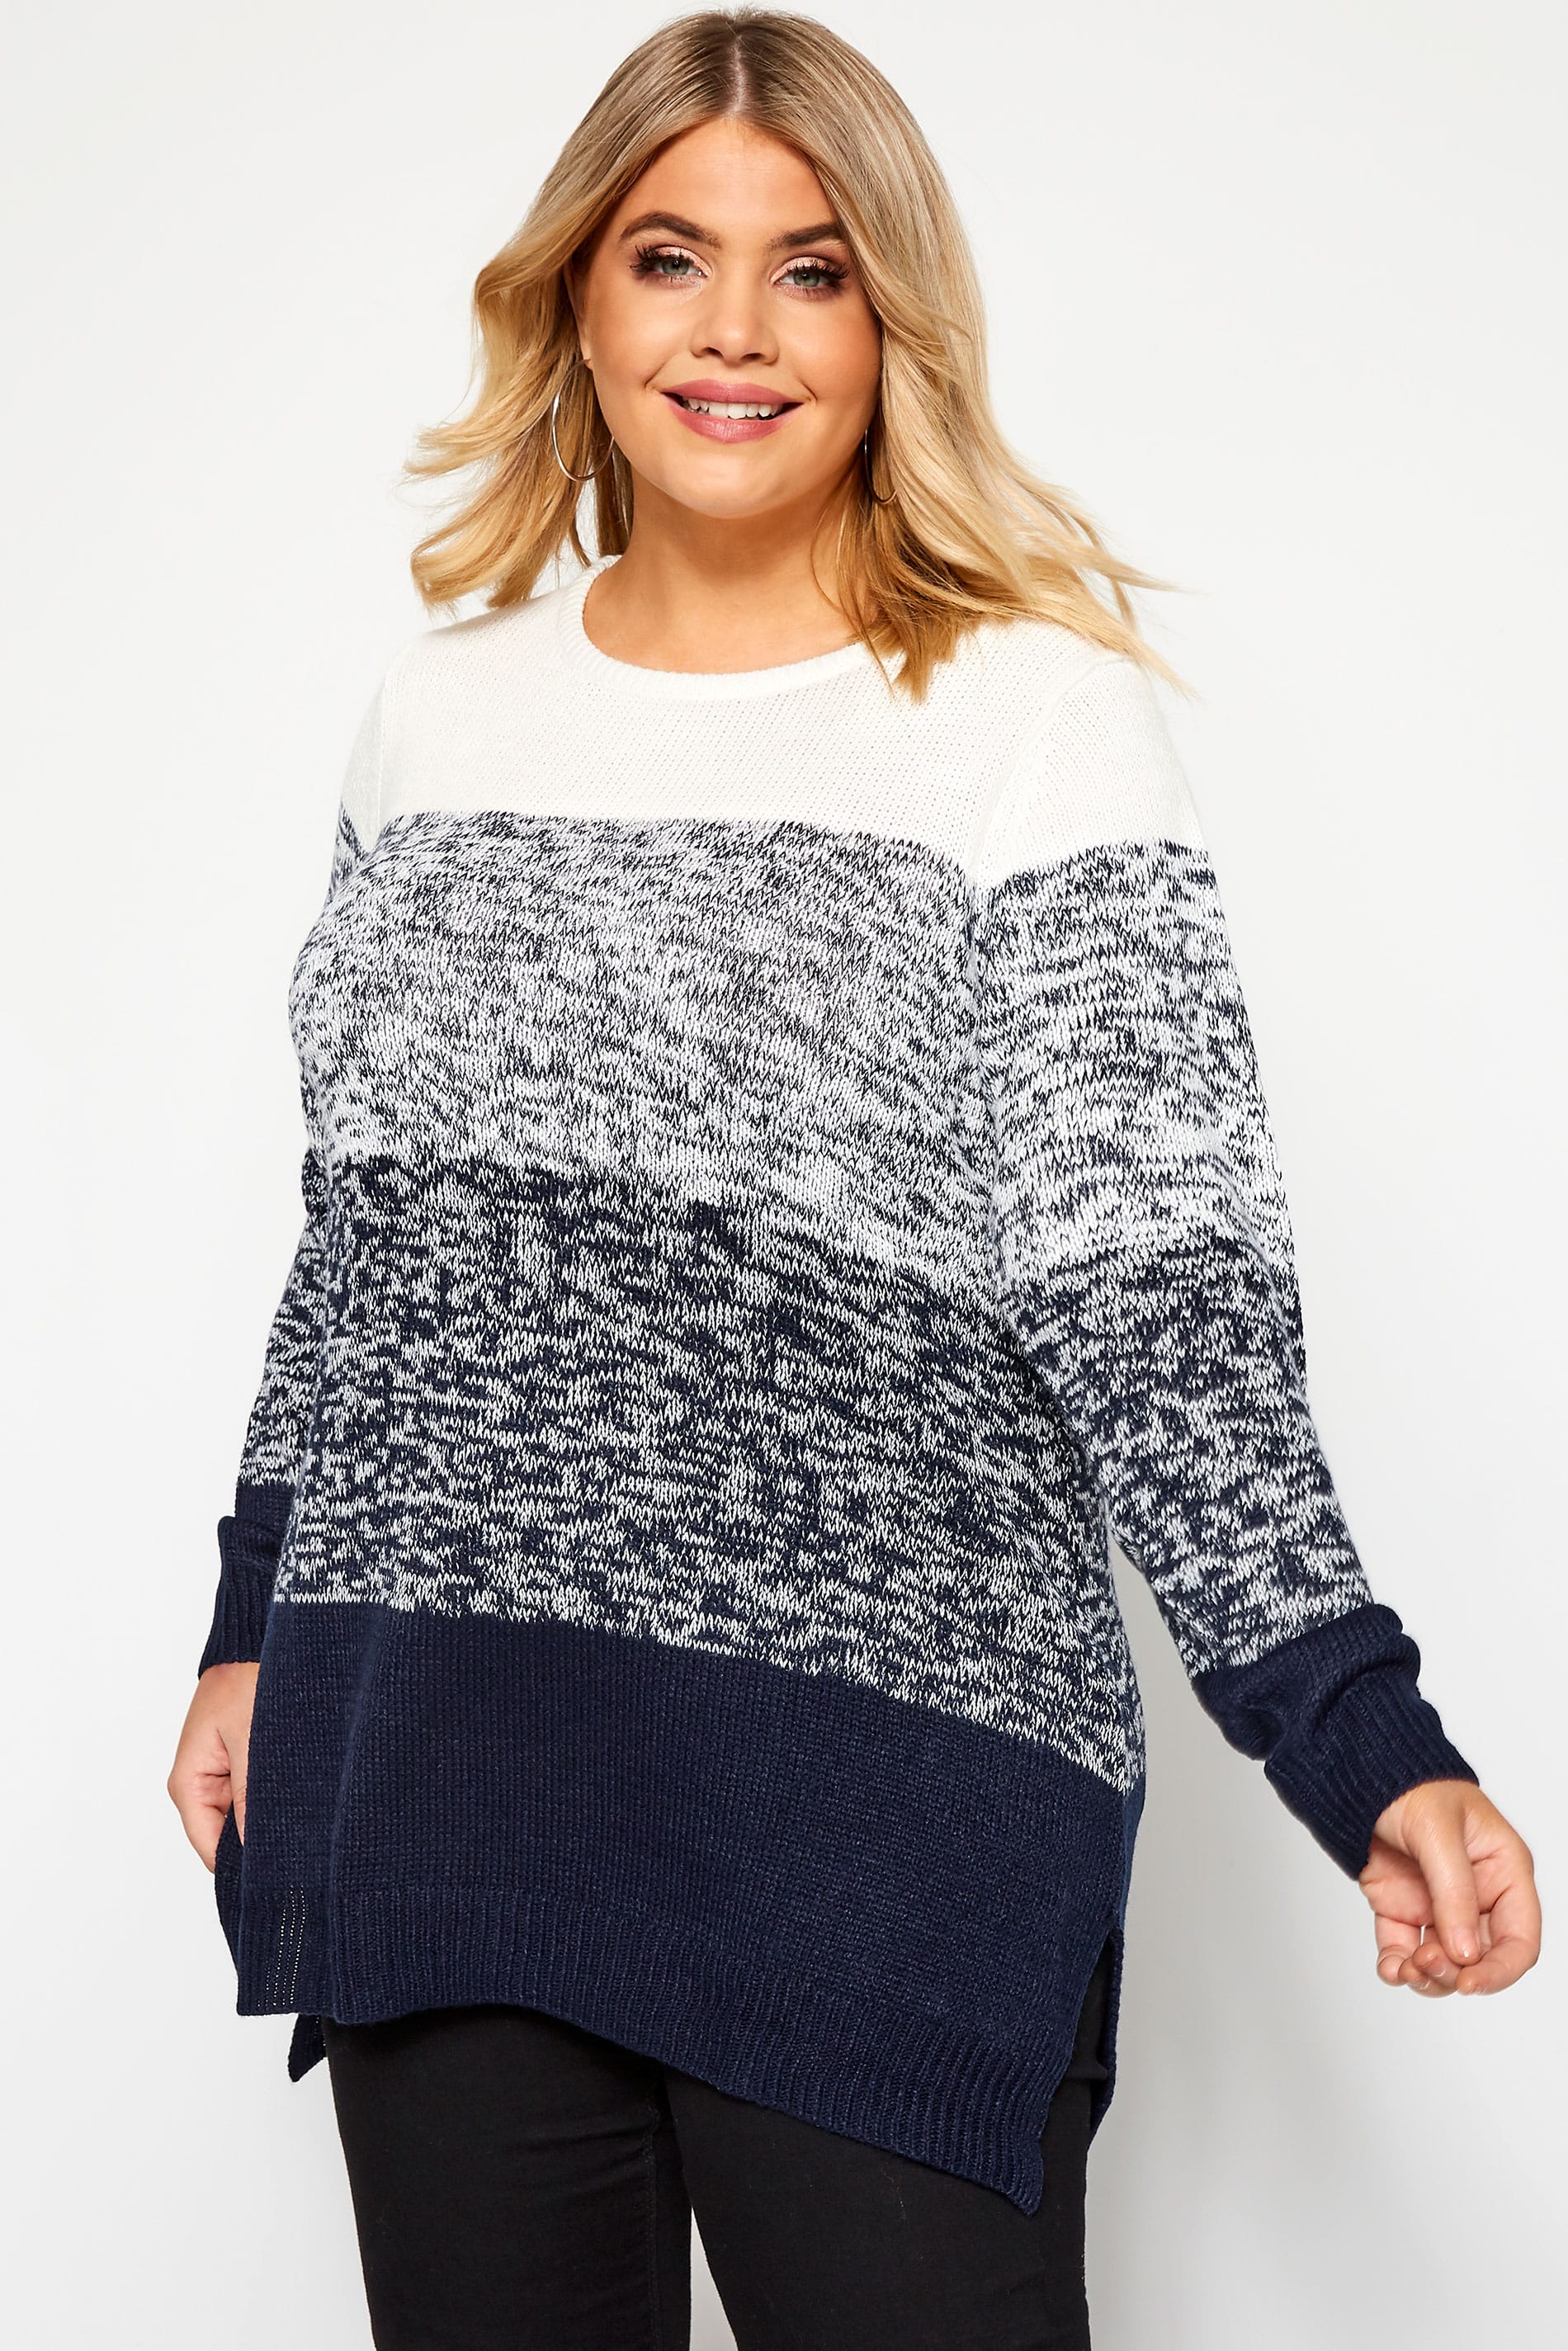 Navy & Cream Colour Block Knitted Jumper | Sizes 16-36 | Yours Clothing 1